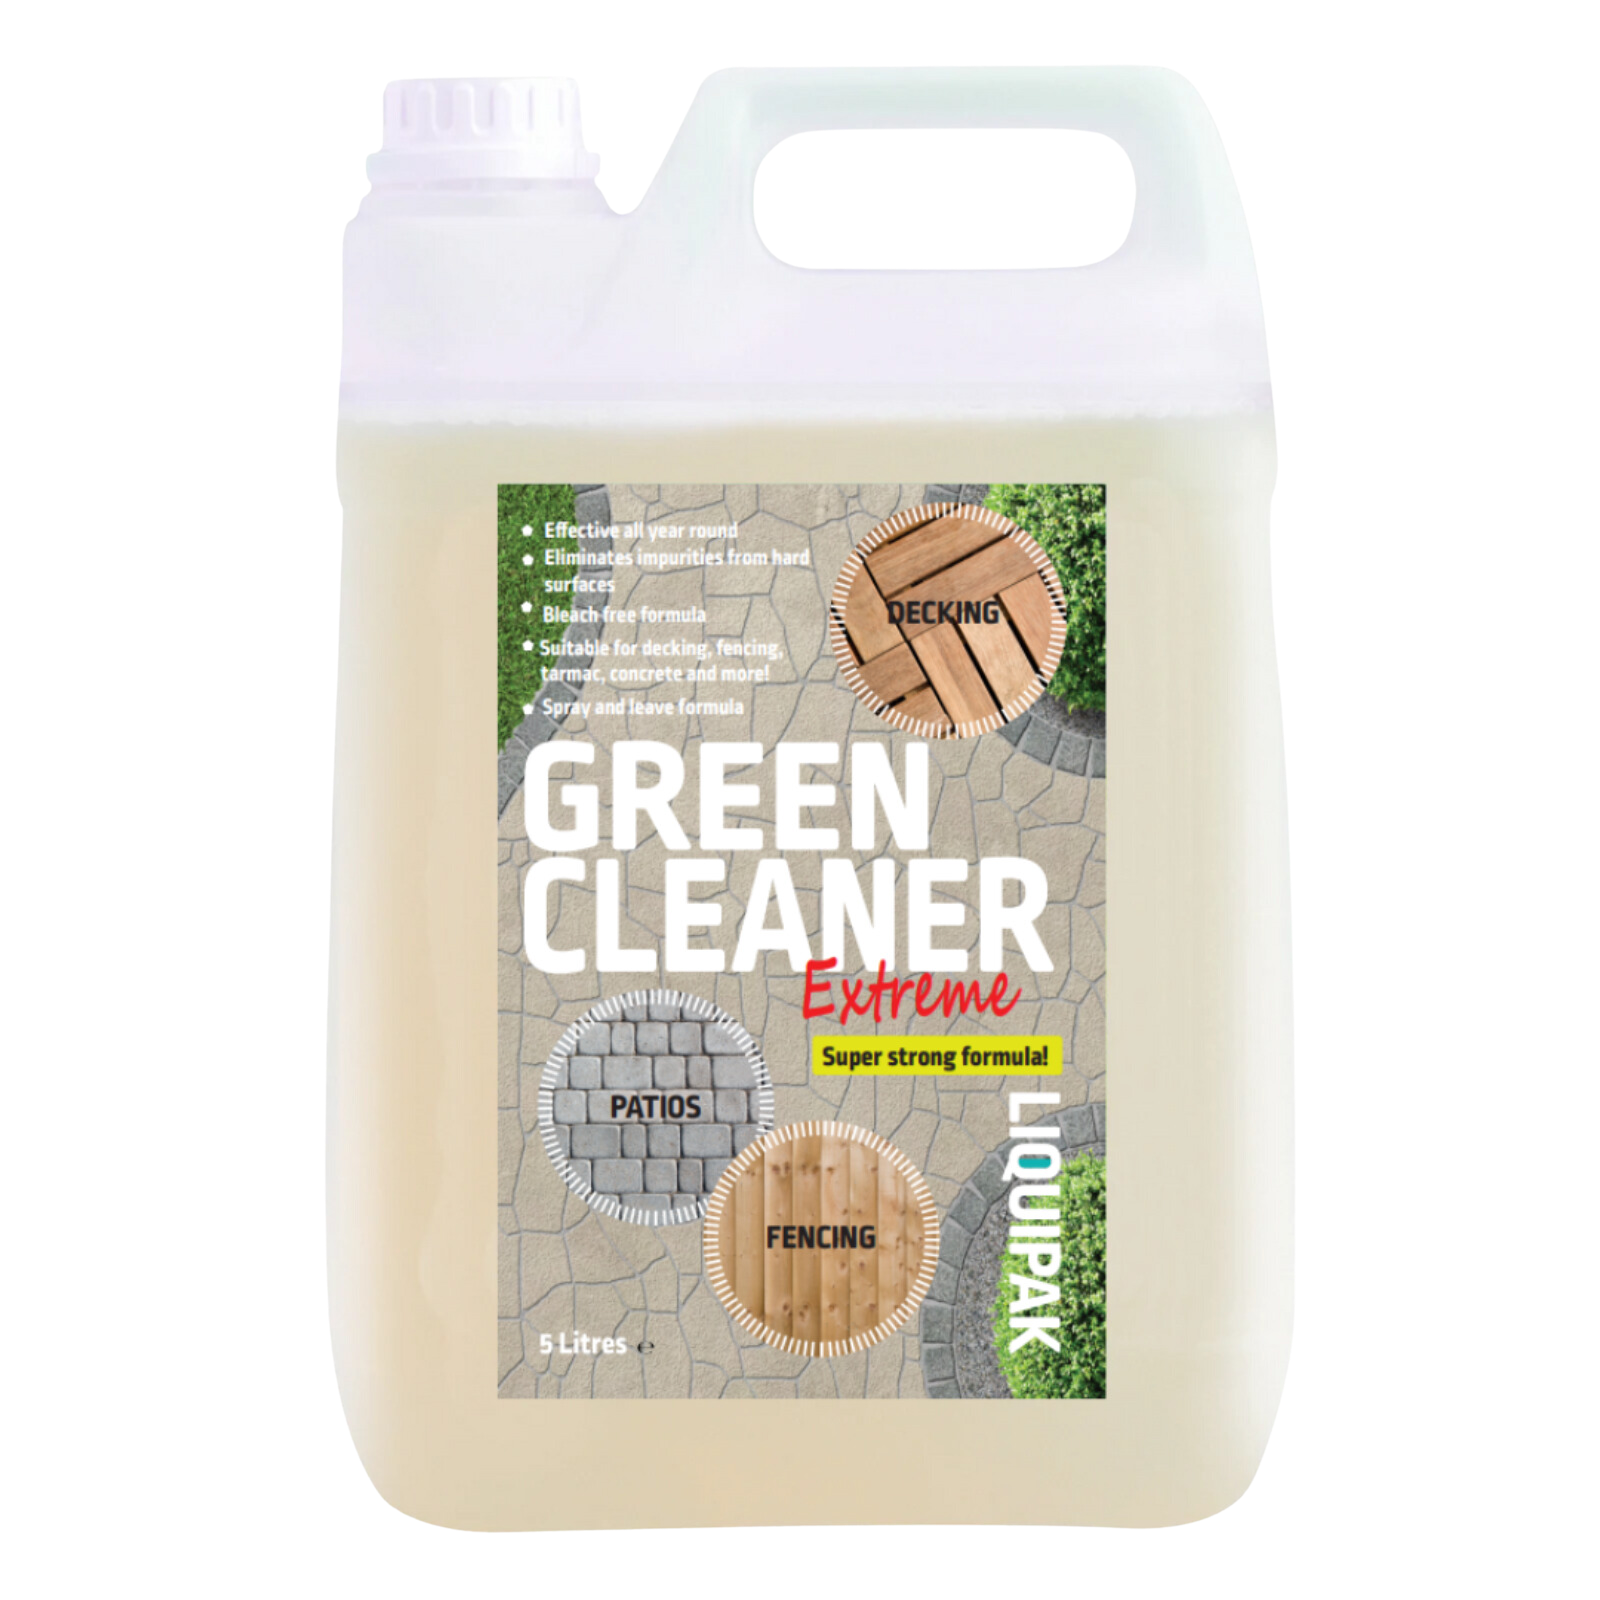 Liquipak Green Cleaner Extreme Path & Patio Cleaner Fluid Spray Wet And Walk Away Green Stain Remover | Liquipak